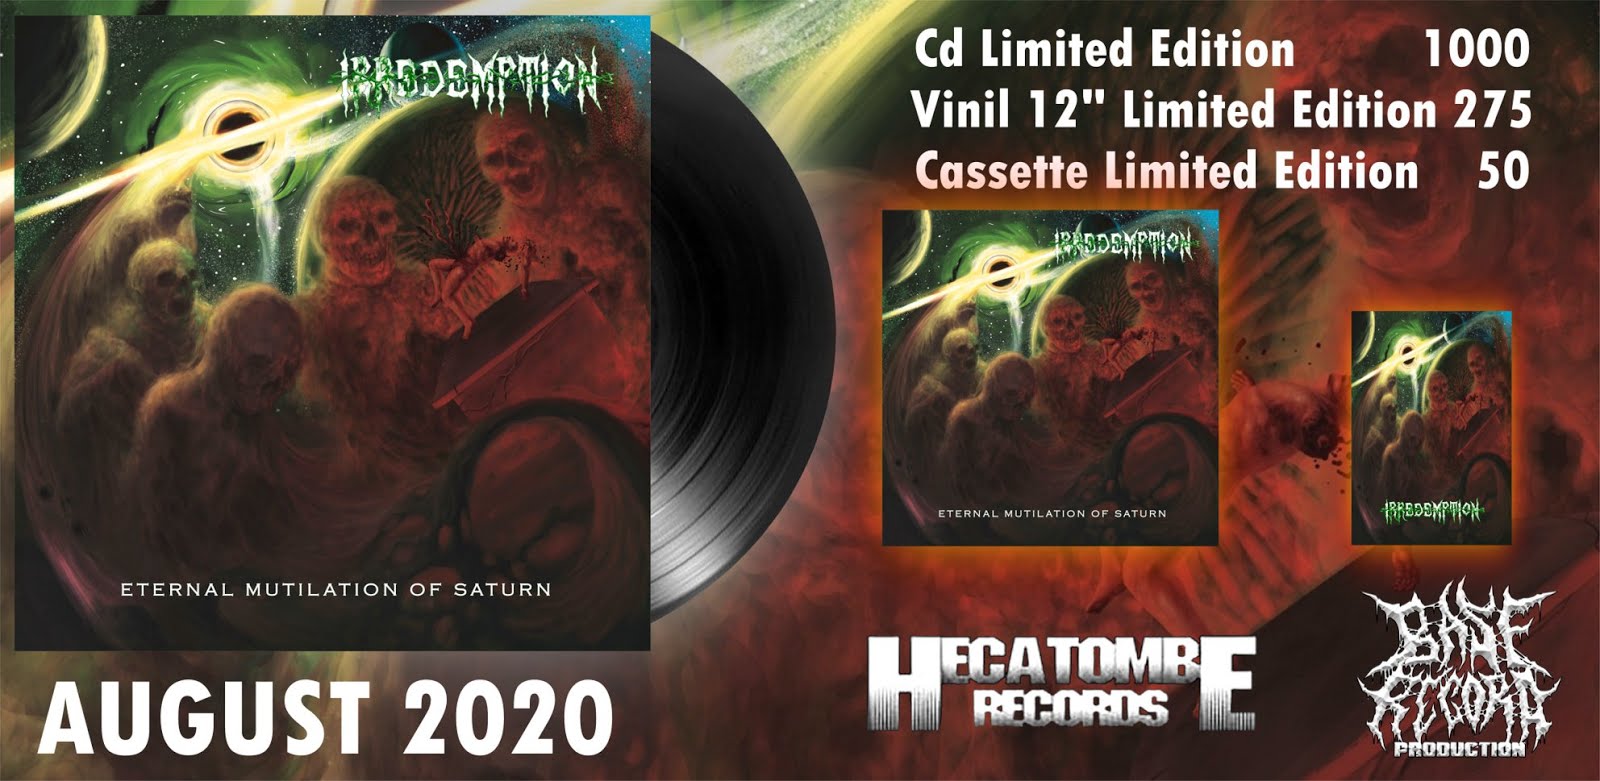 IRREDEMPTION "Eternal mutilation of Saturn" CD ( death metal from Spain) and coming soon 12"LP viny